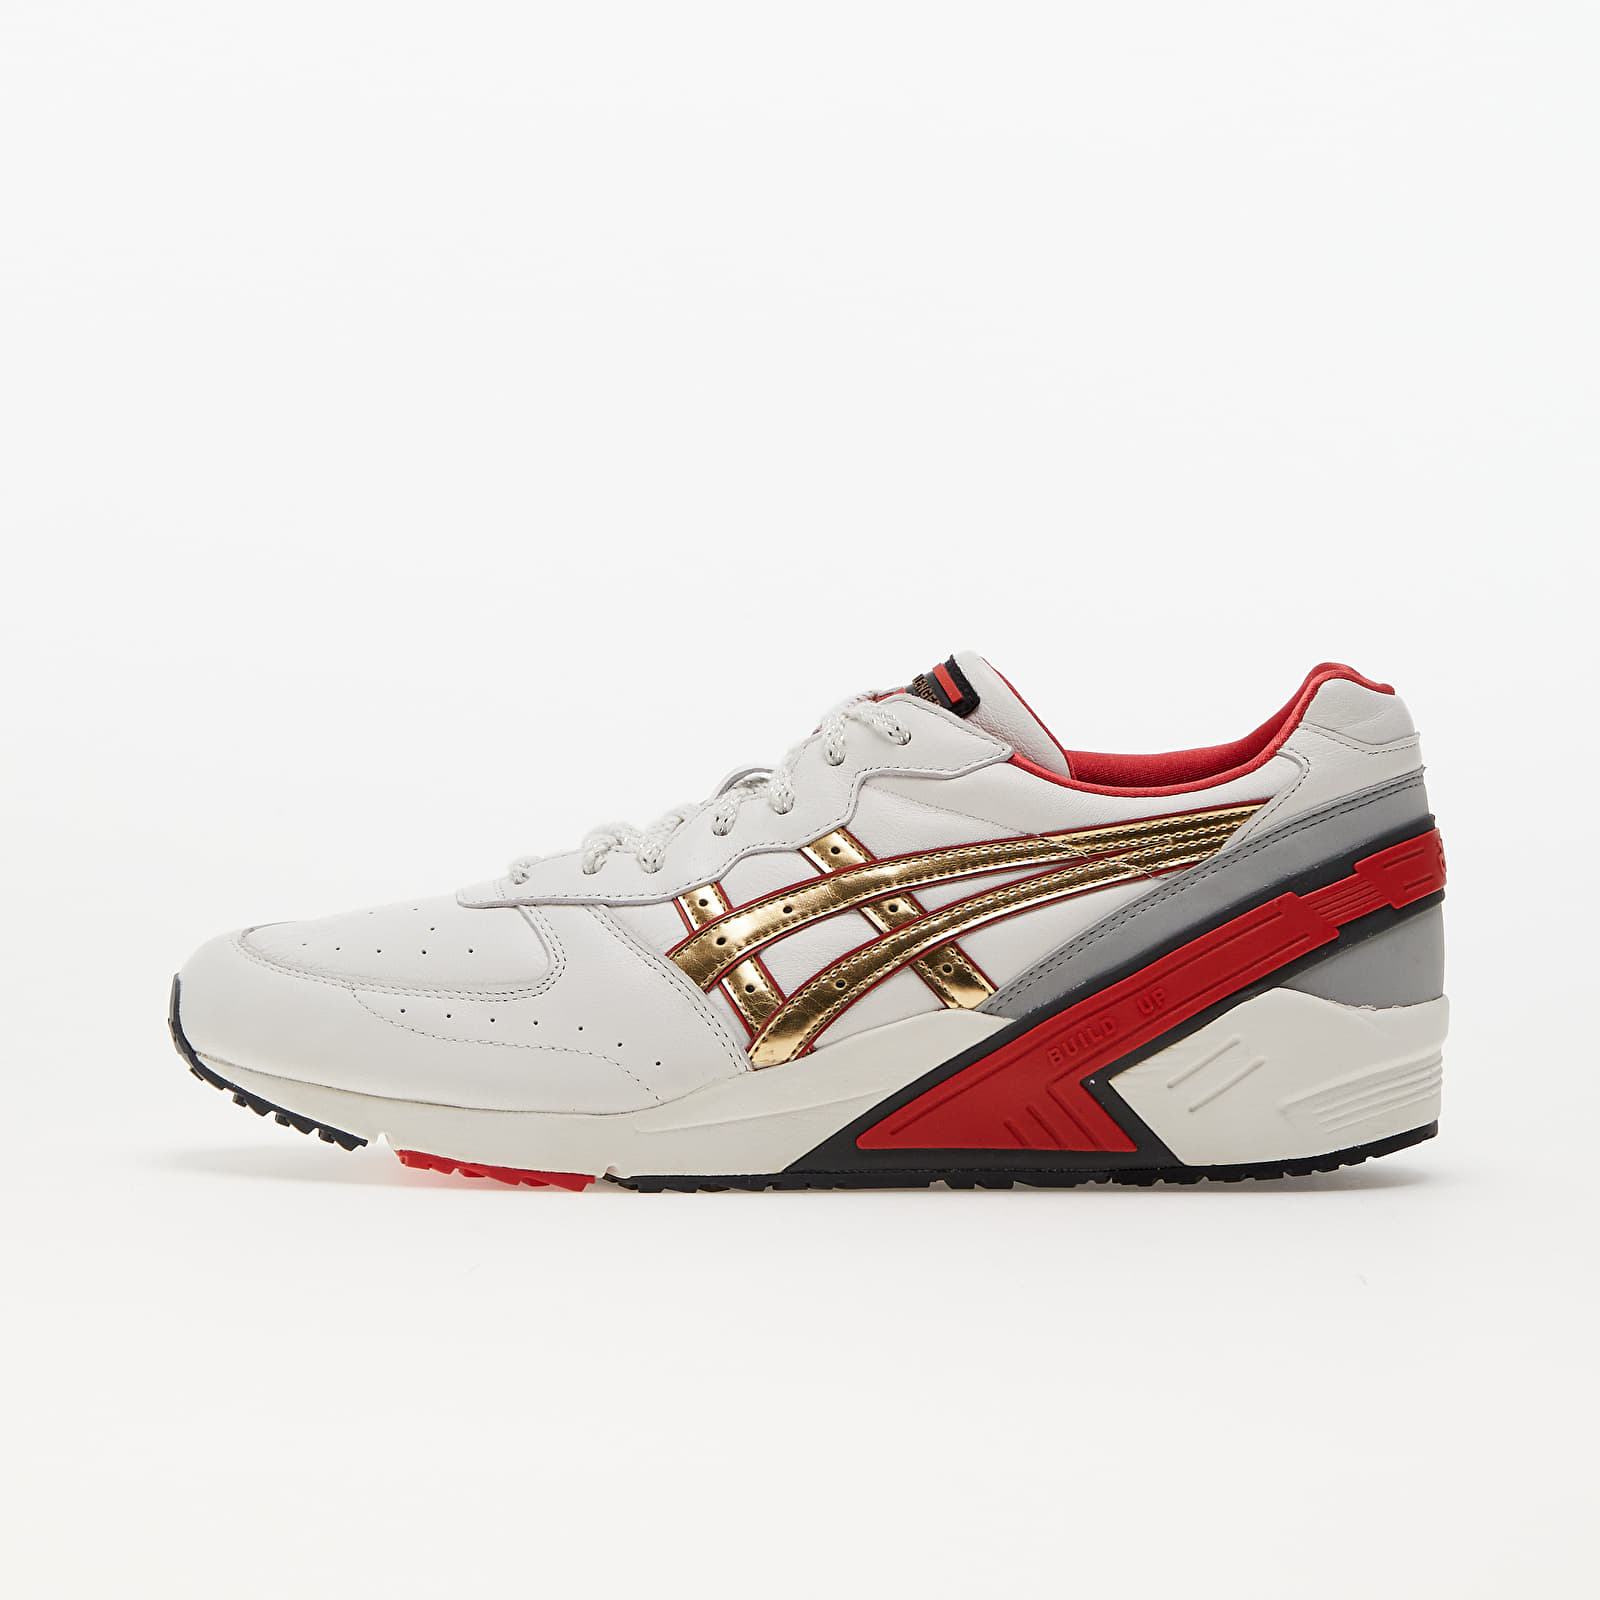 Men's shoes Asics Gel-Sight Off-White/ Champagne Gold